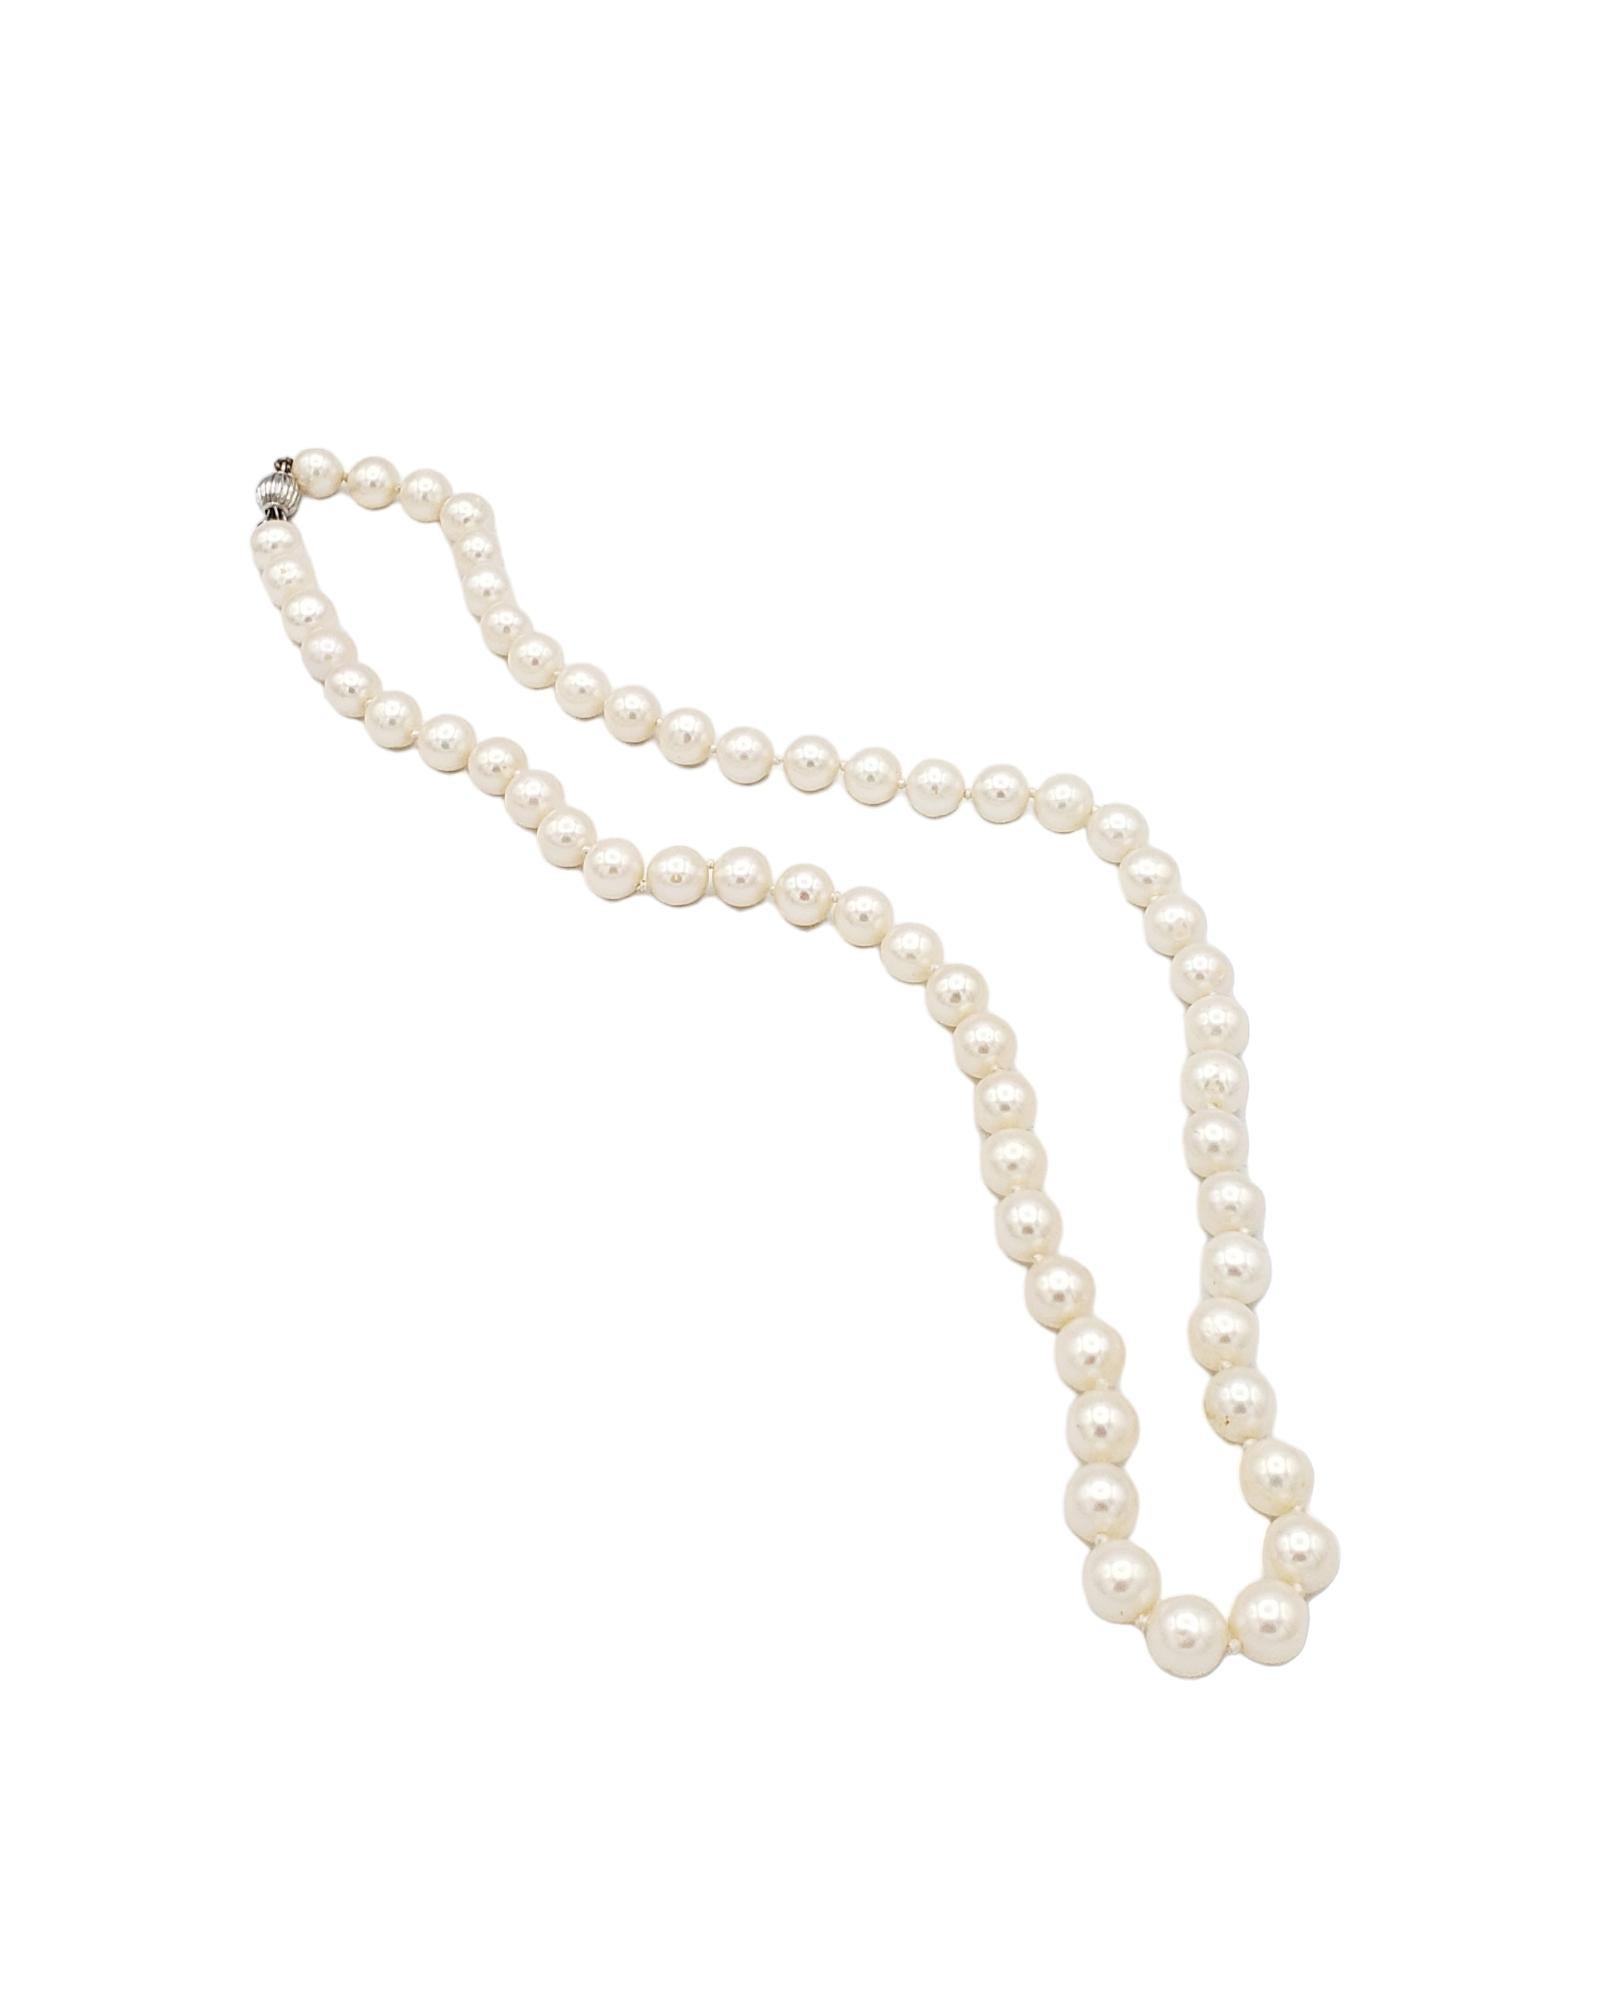 NEW Certified AA+ Quality Japanese Akoya Salt Water White Pearl Necklace For Sale 5